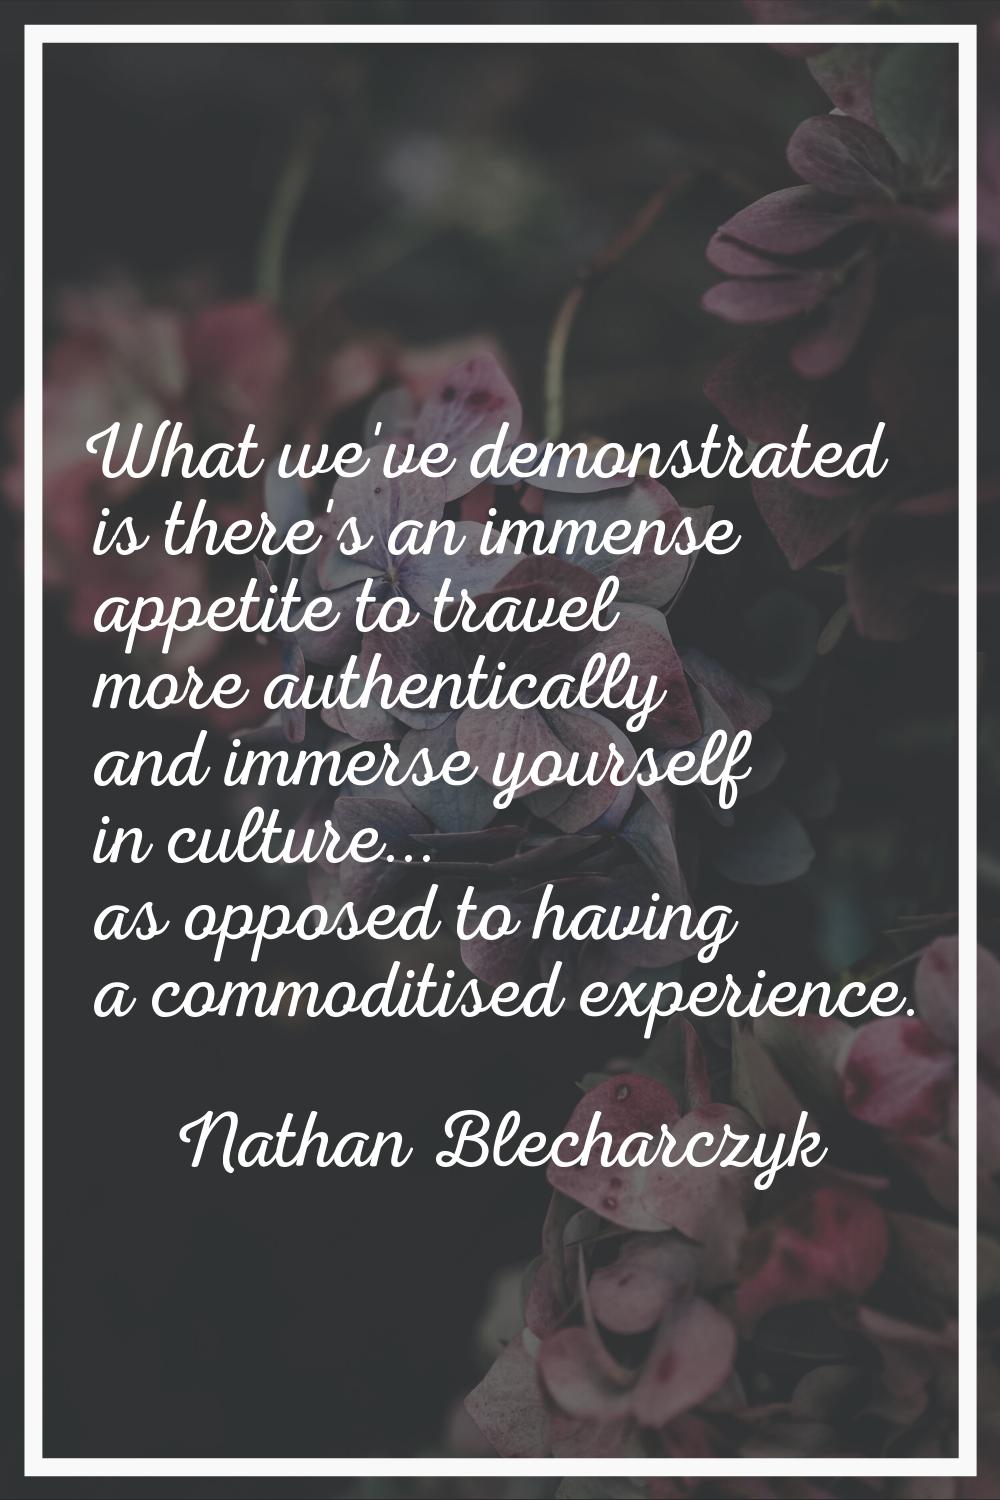 What we've demonstrated is there's an immense appetite to travel more authentically and immerse you